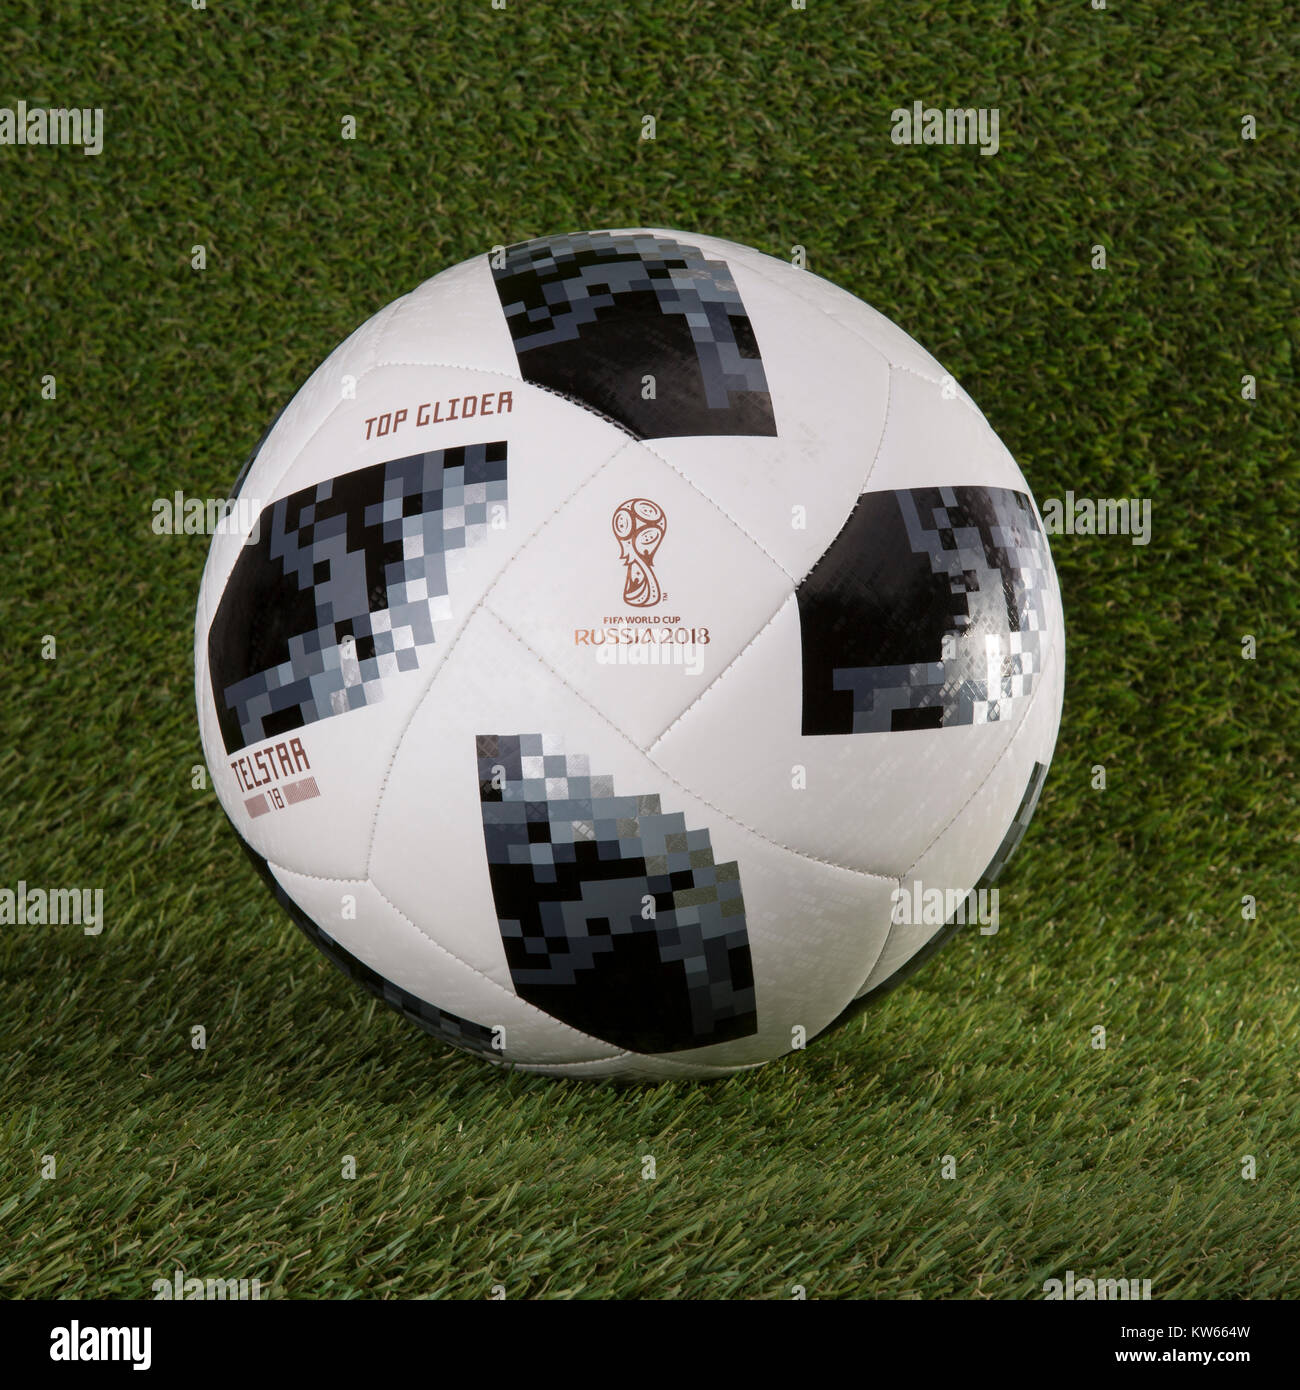 Out of stock Adidas Brazuca Final Top Glider Match Ball Replica